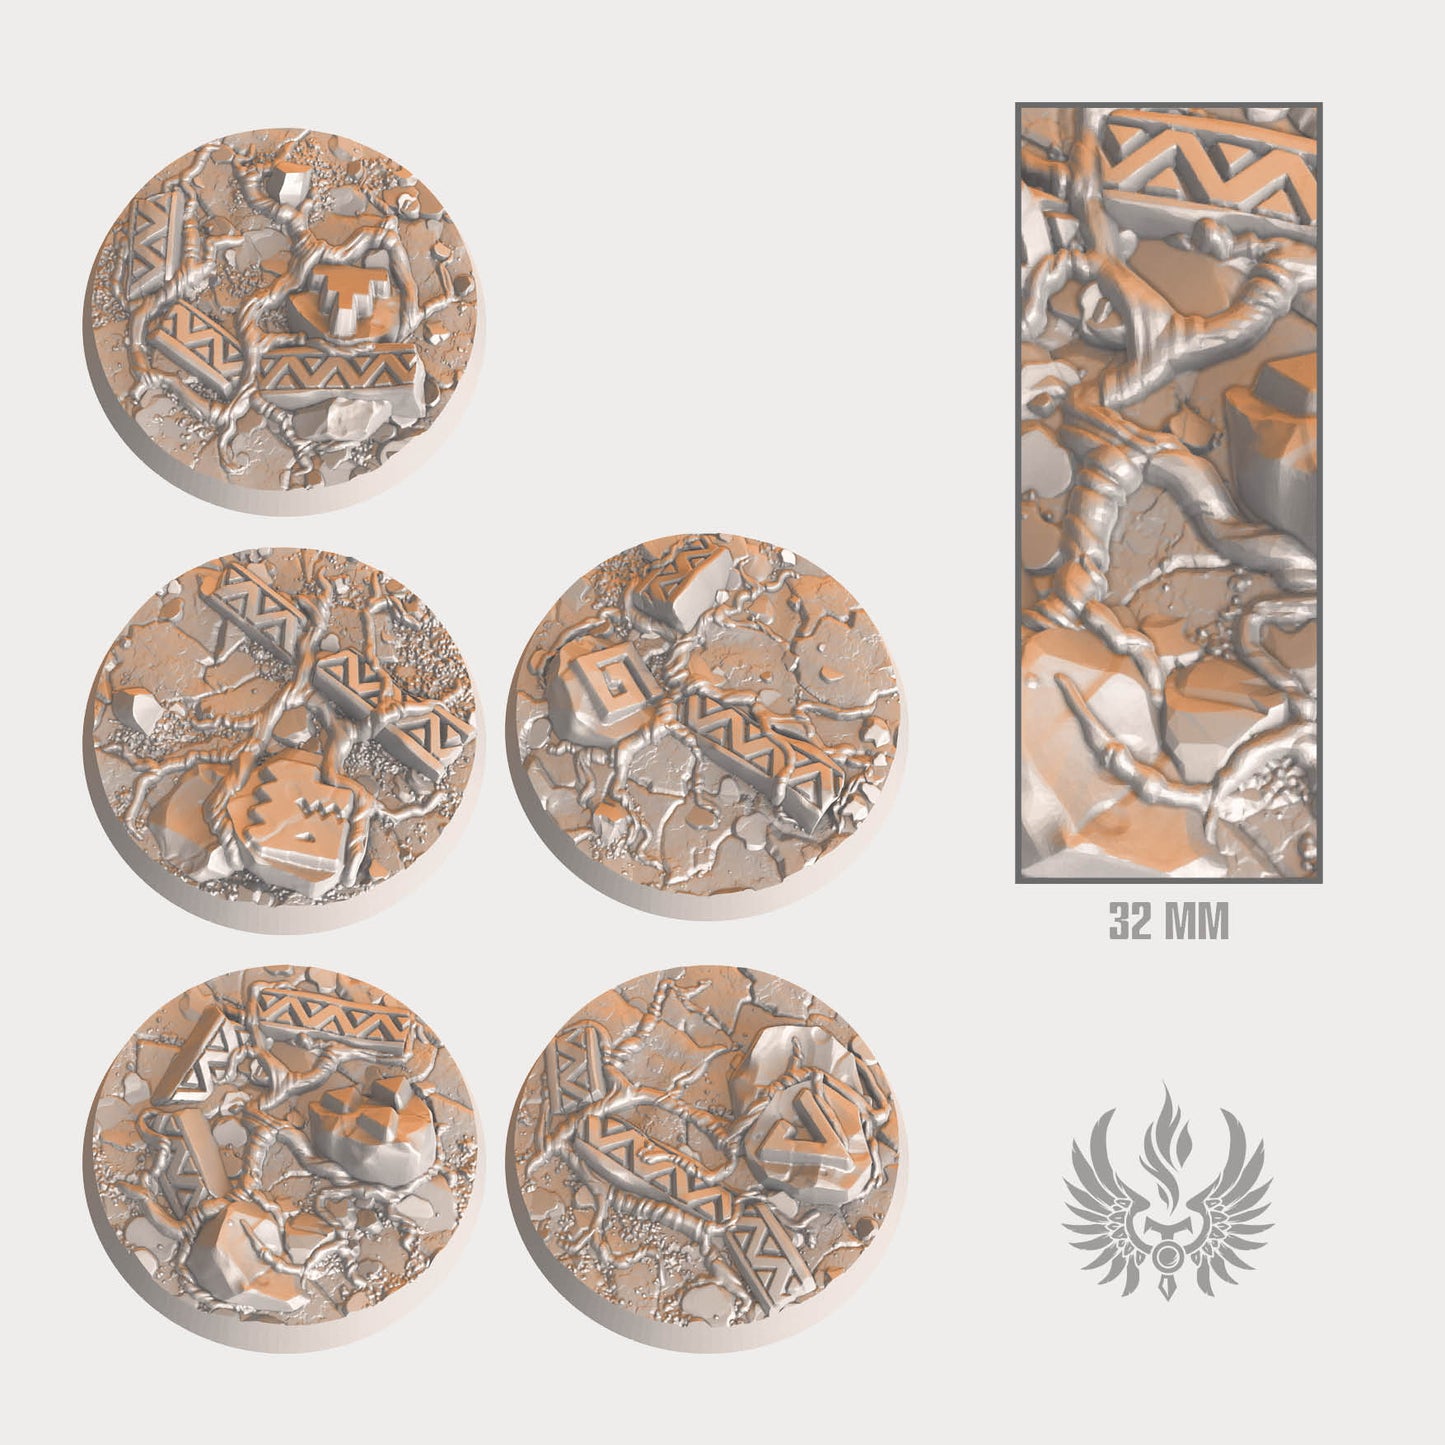 Ancient grounds bases 32 mm, set 1